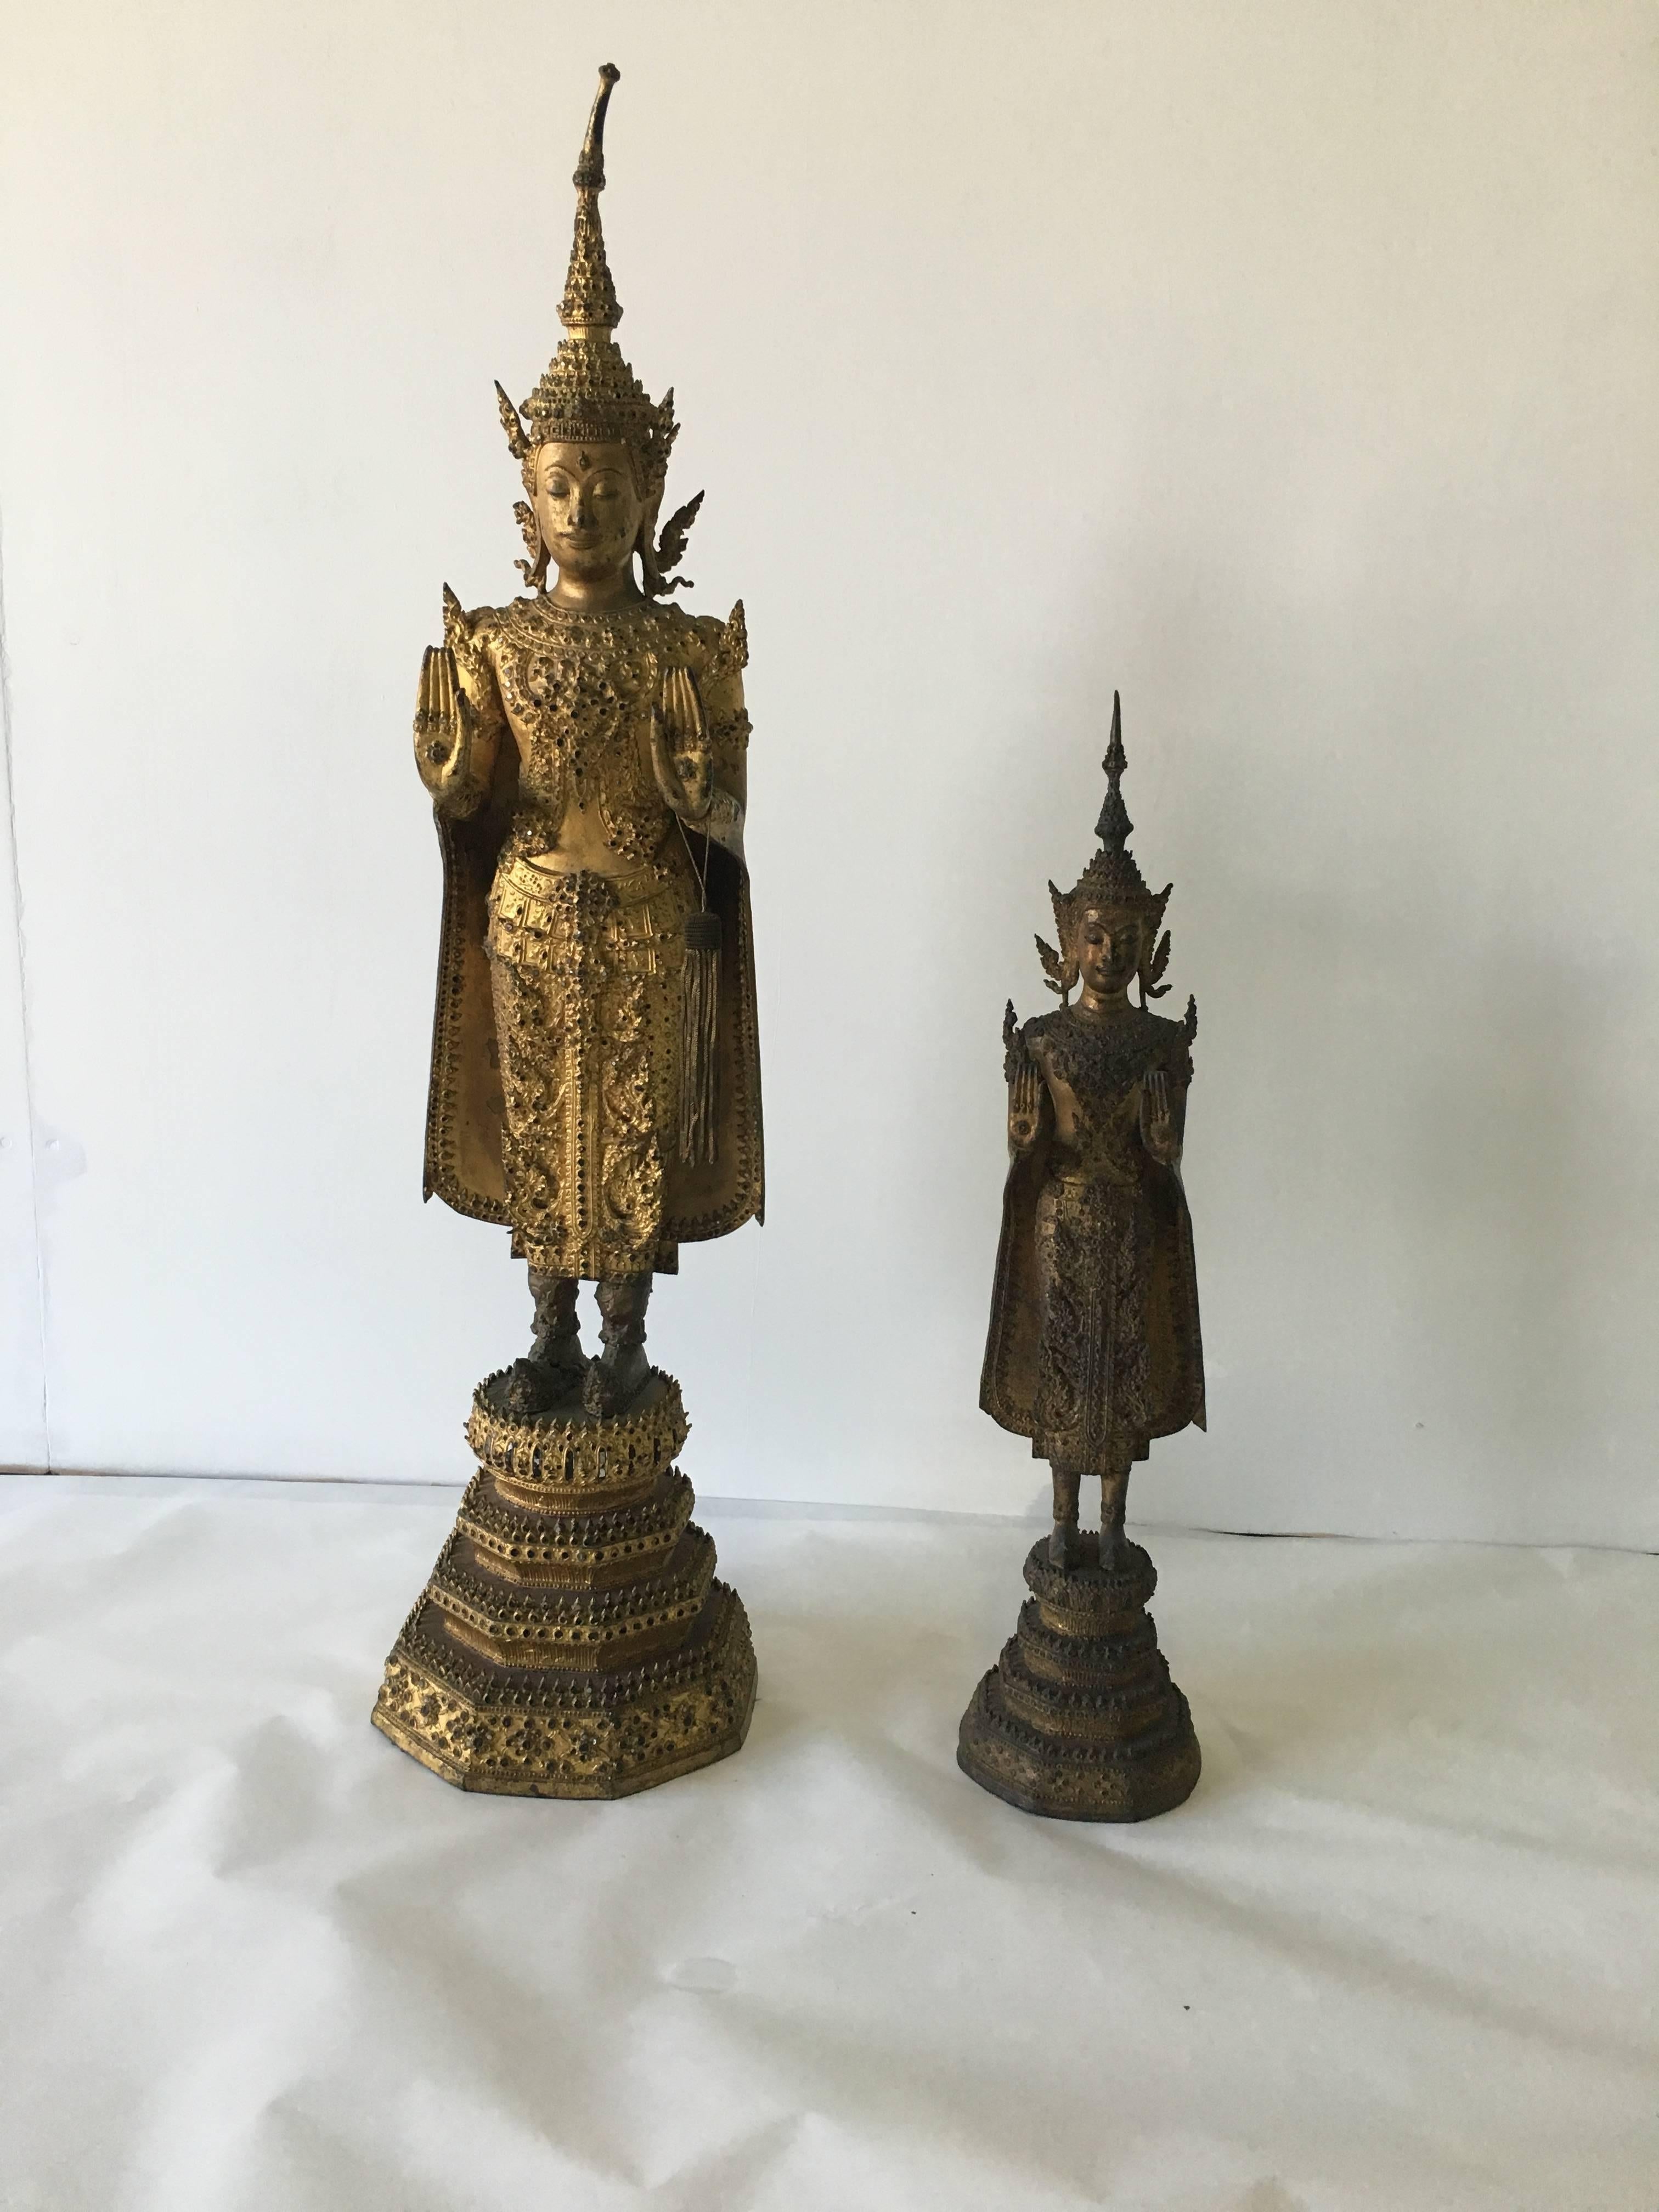 Late 19th century - beautifully preserved coloring.

Dimensions of taller: 33 inches tall (price $4,600).

Dimensions smaller: 22.5 inches tall (price $3,300).

This Buddha in standing position was executed in a typical Laotian style, which